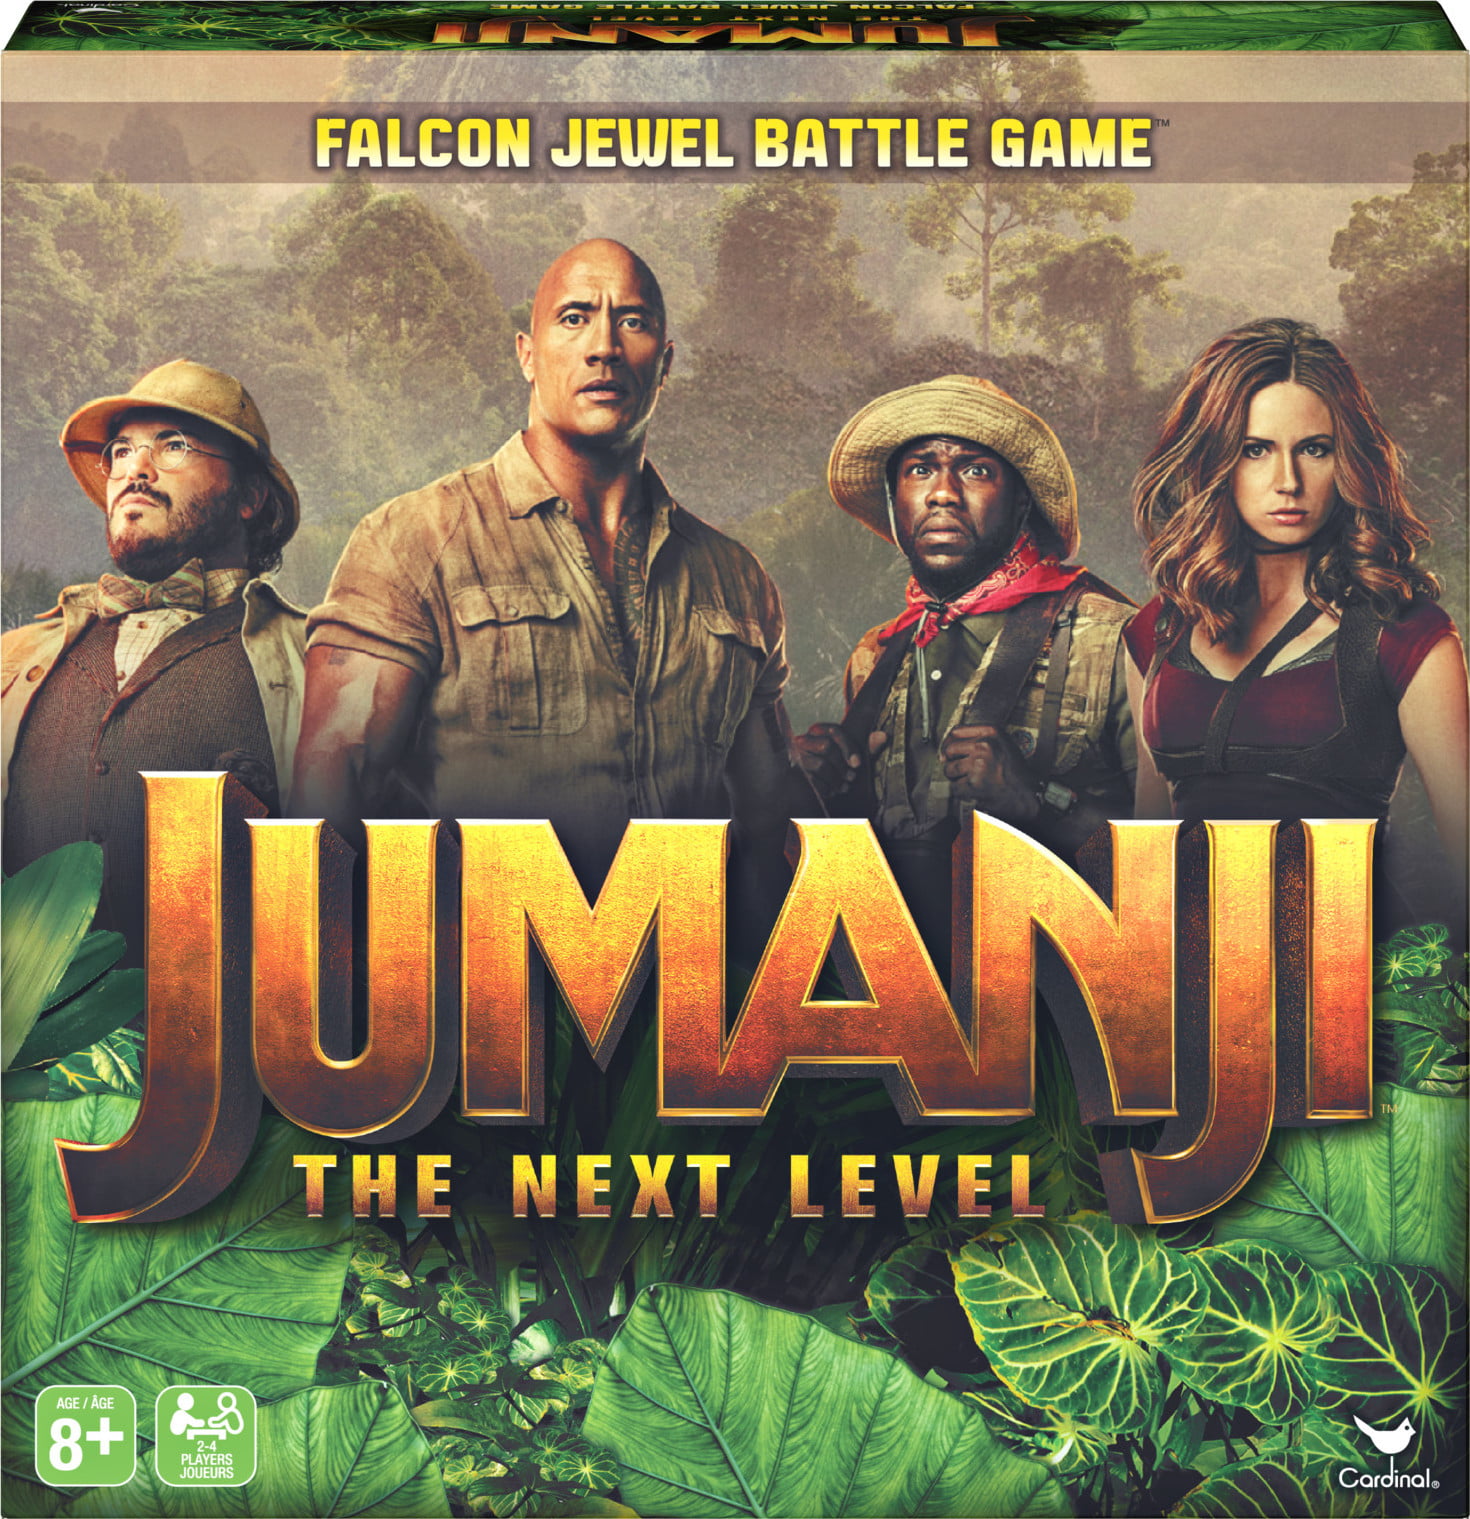 NEW SEALED  JUMANJI BOARD GAME REAL WOOD WOODEN BOX CASE EDITION PRIORITY SHIP 